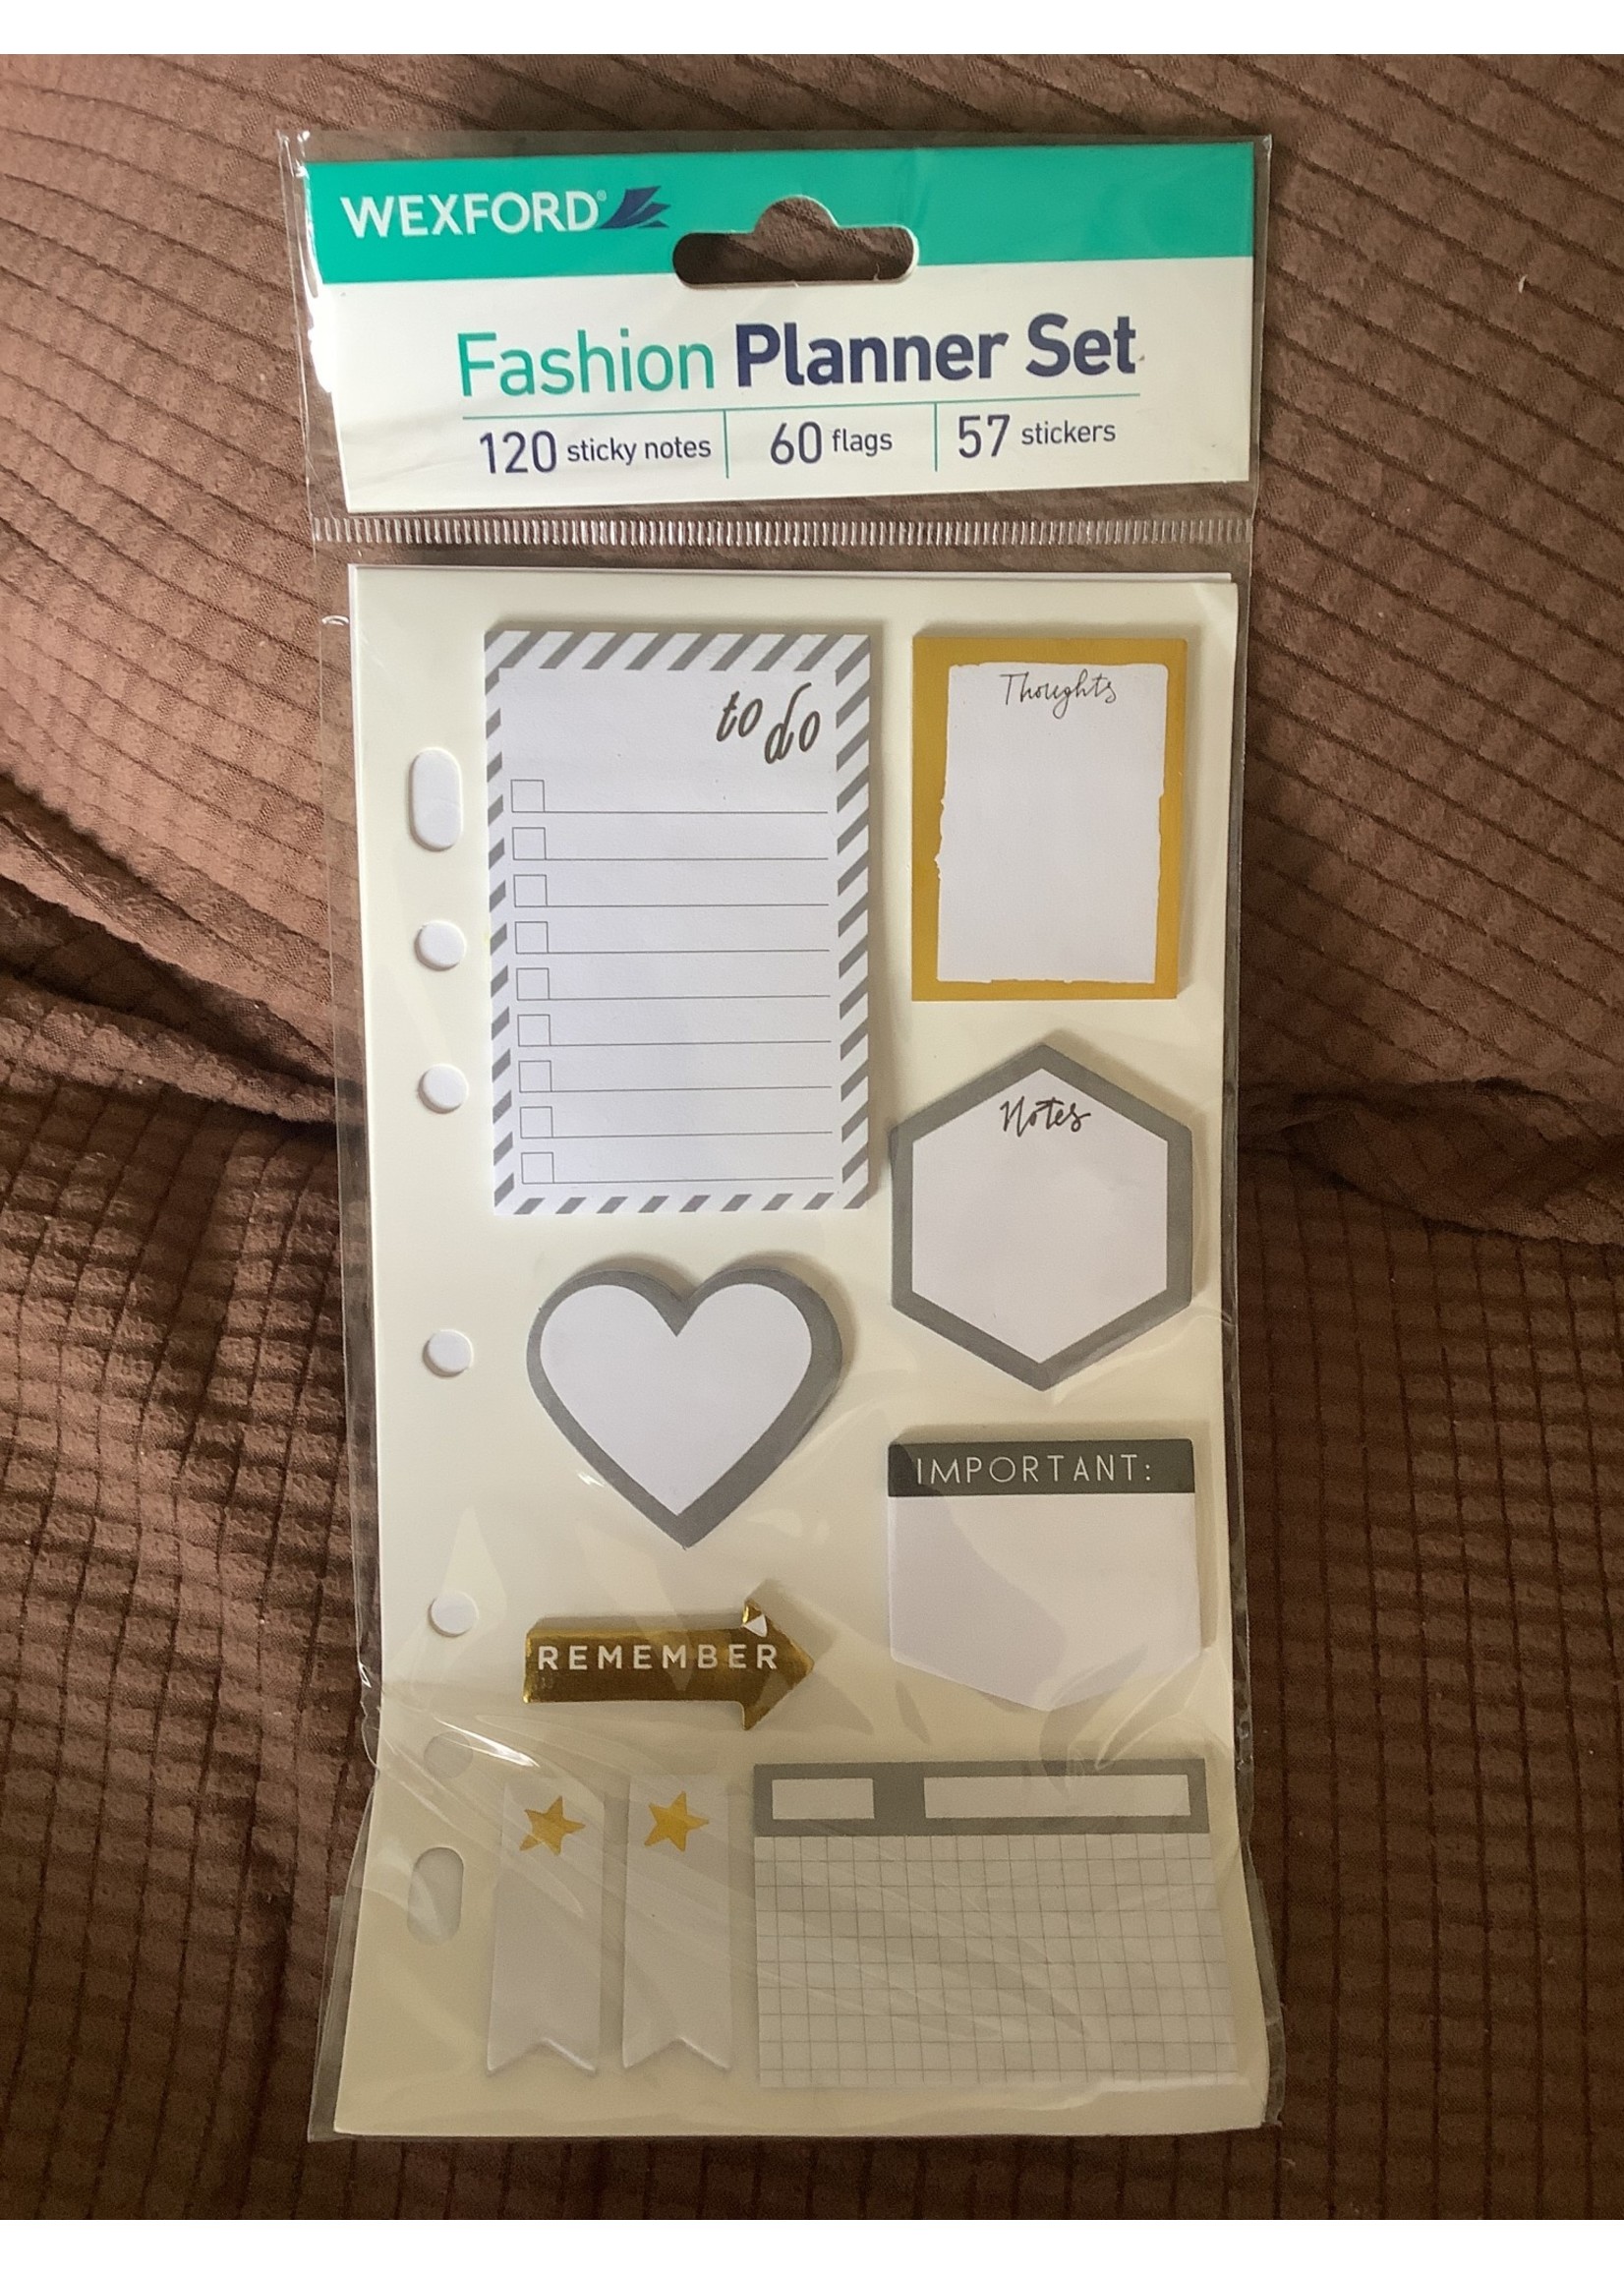 *Bent packaging- Wexford Fashion Planner Set